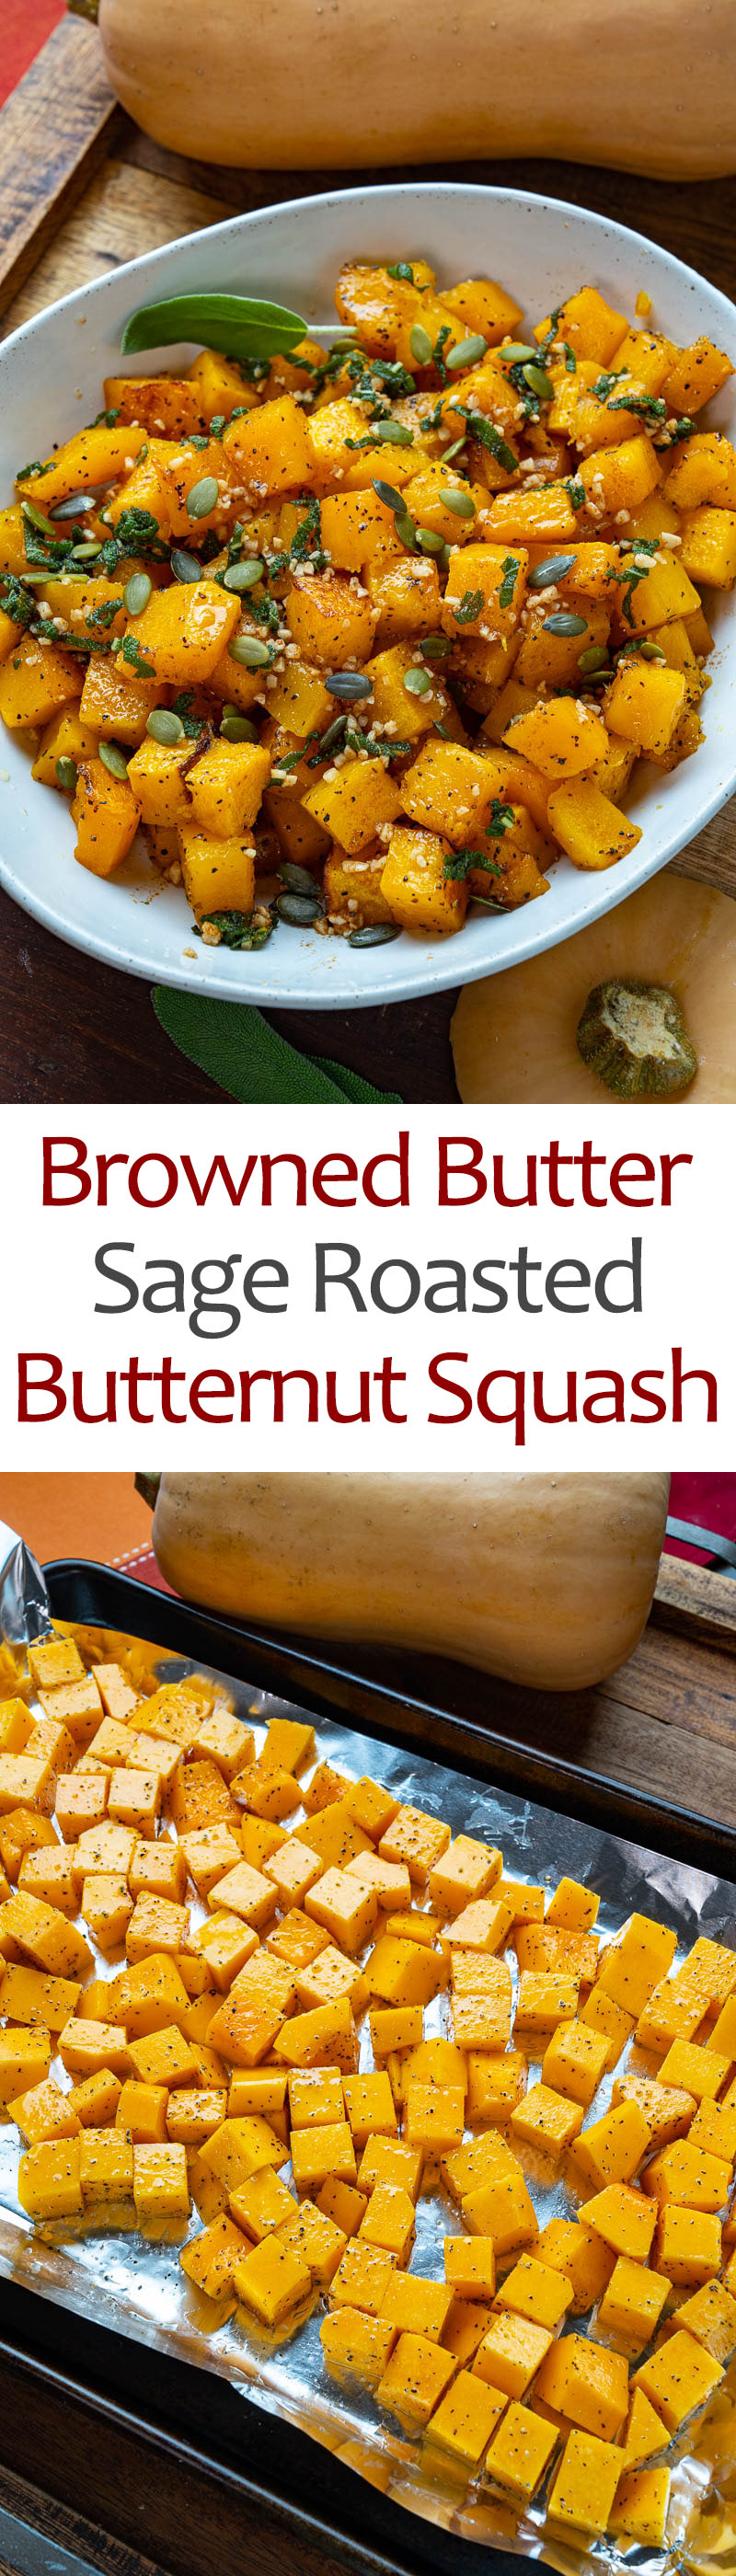 Browned Butter and Sage Roasted Butternut Squash